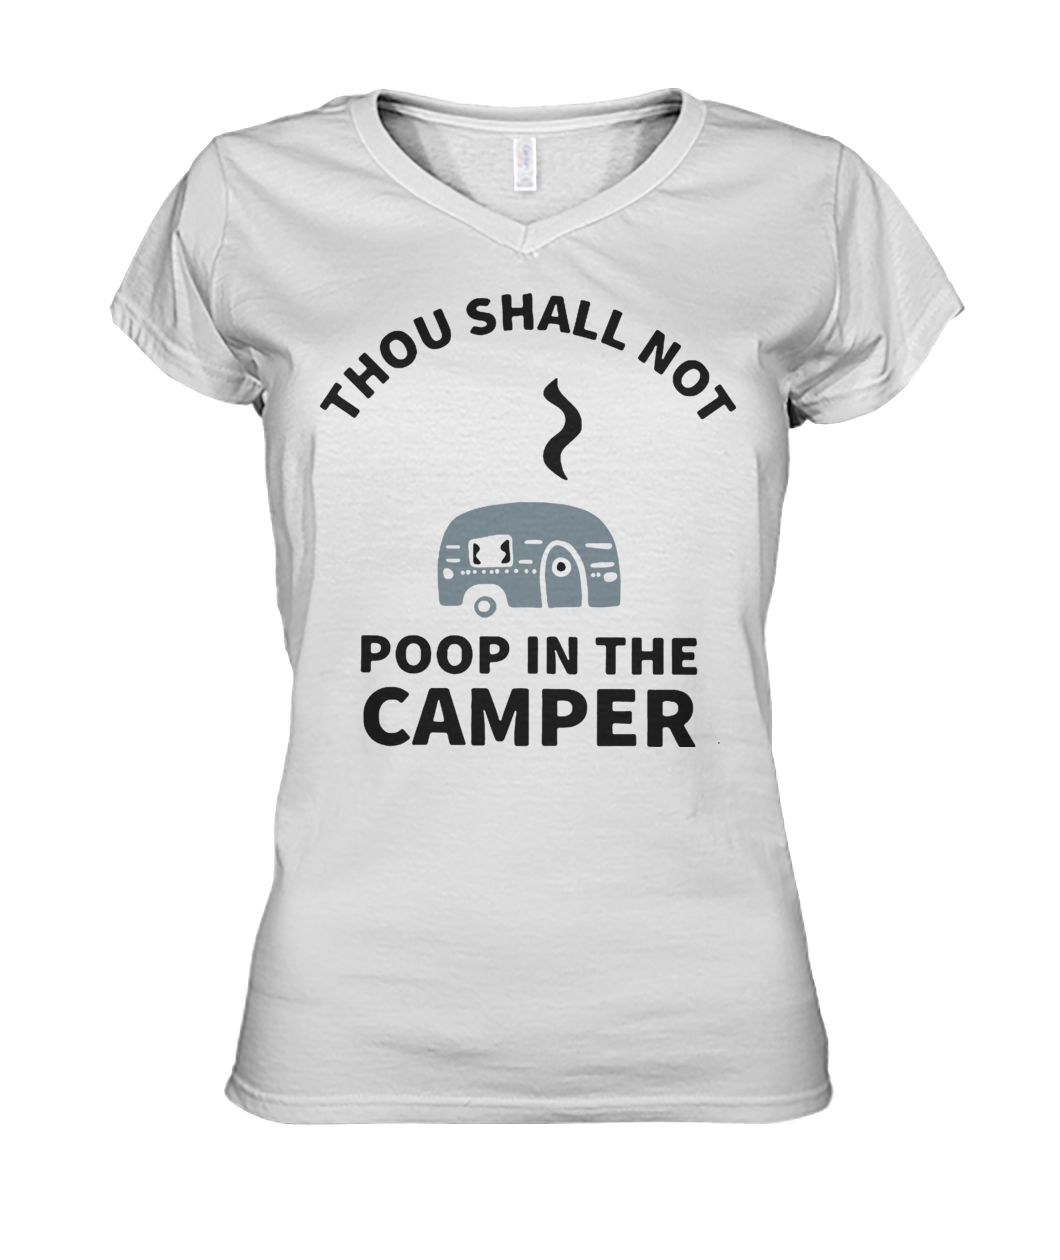 Thou shall not poop in the camper women's v-neck